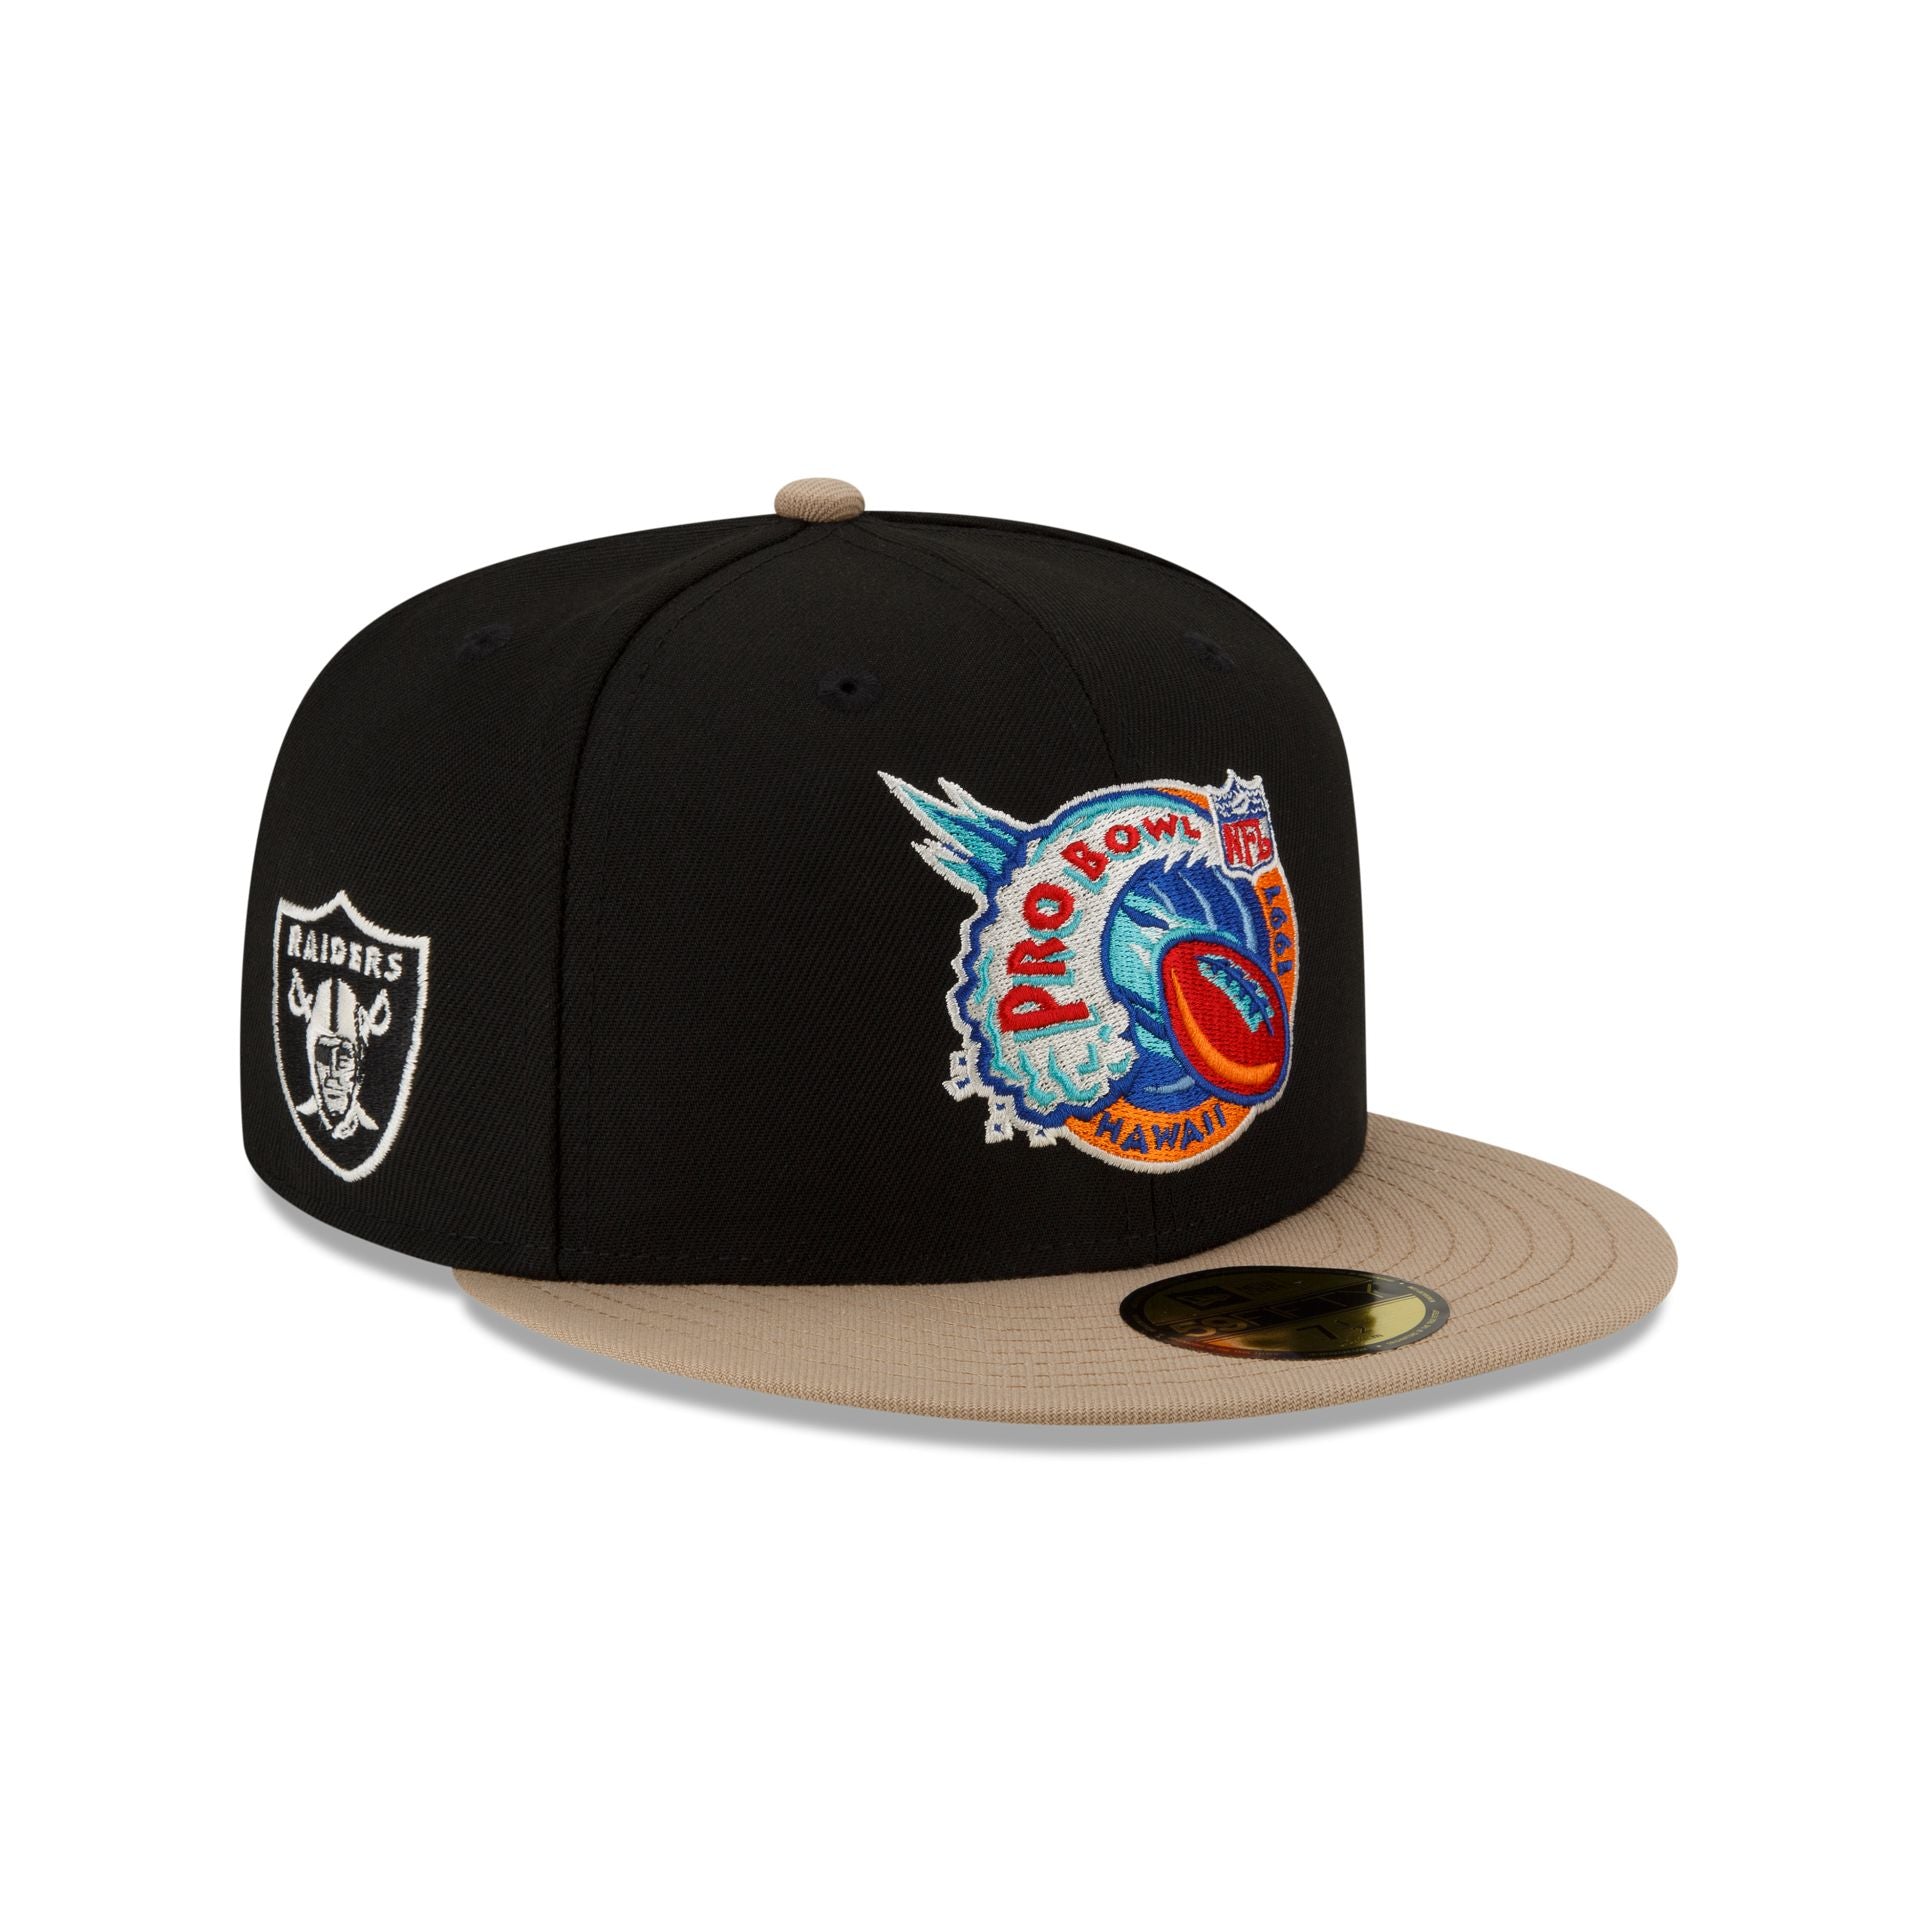 Just Caps Camel Visor Las Vegas Raiders 59FIFTY Fitted Hat, Black - Size: 7 1/2, NFL by New Era